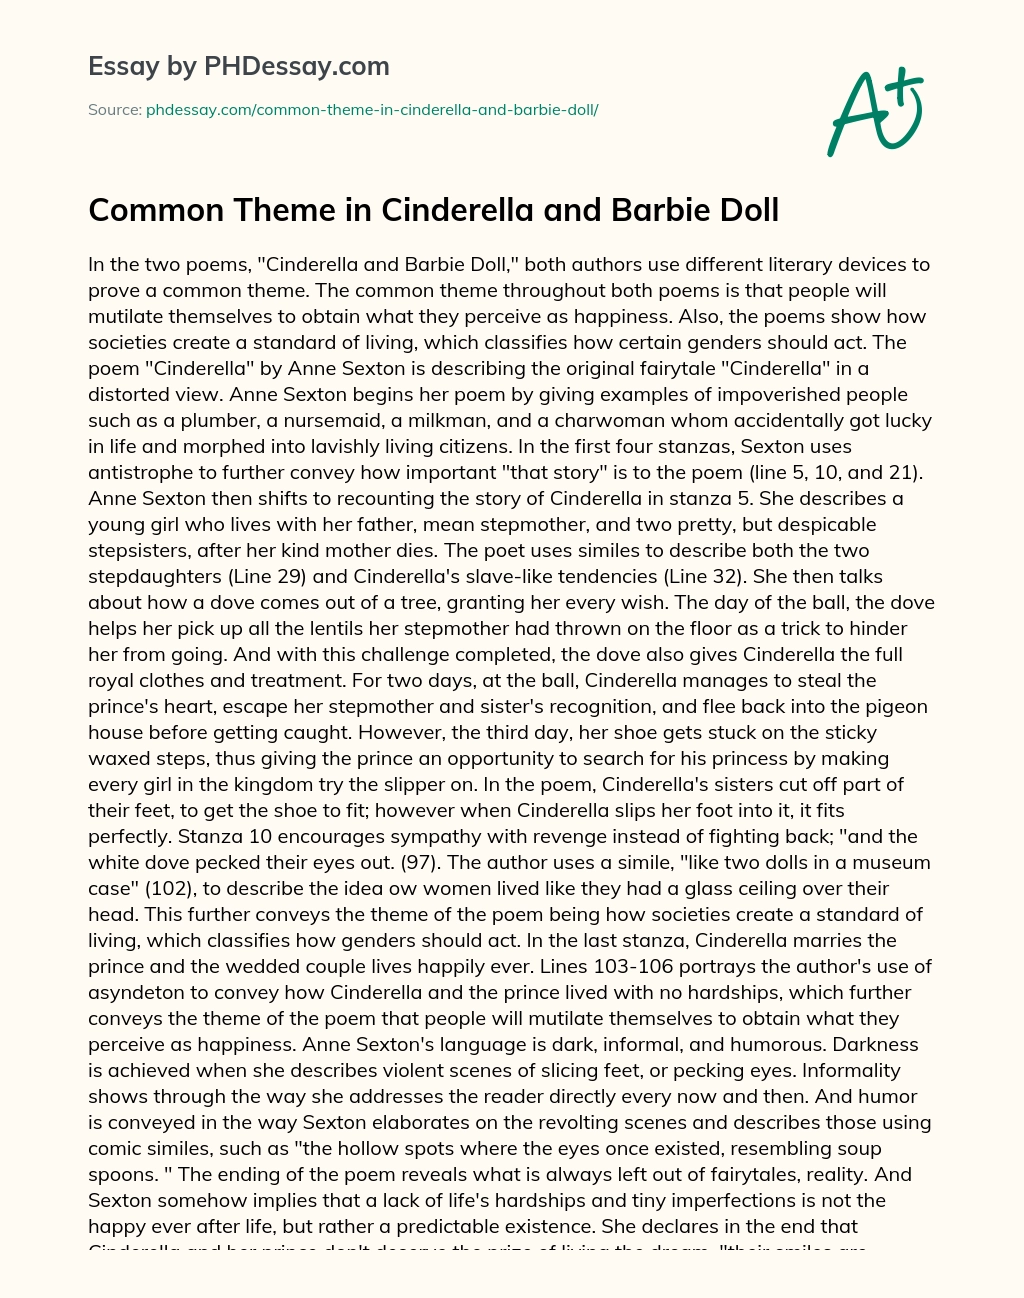 Common Theme in Cinderella and Barbie Doll essay